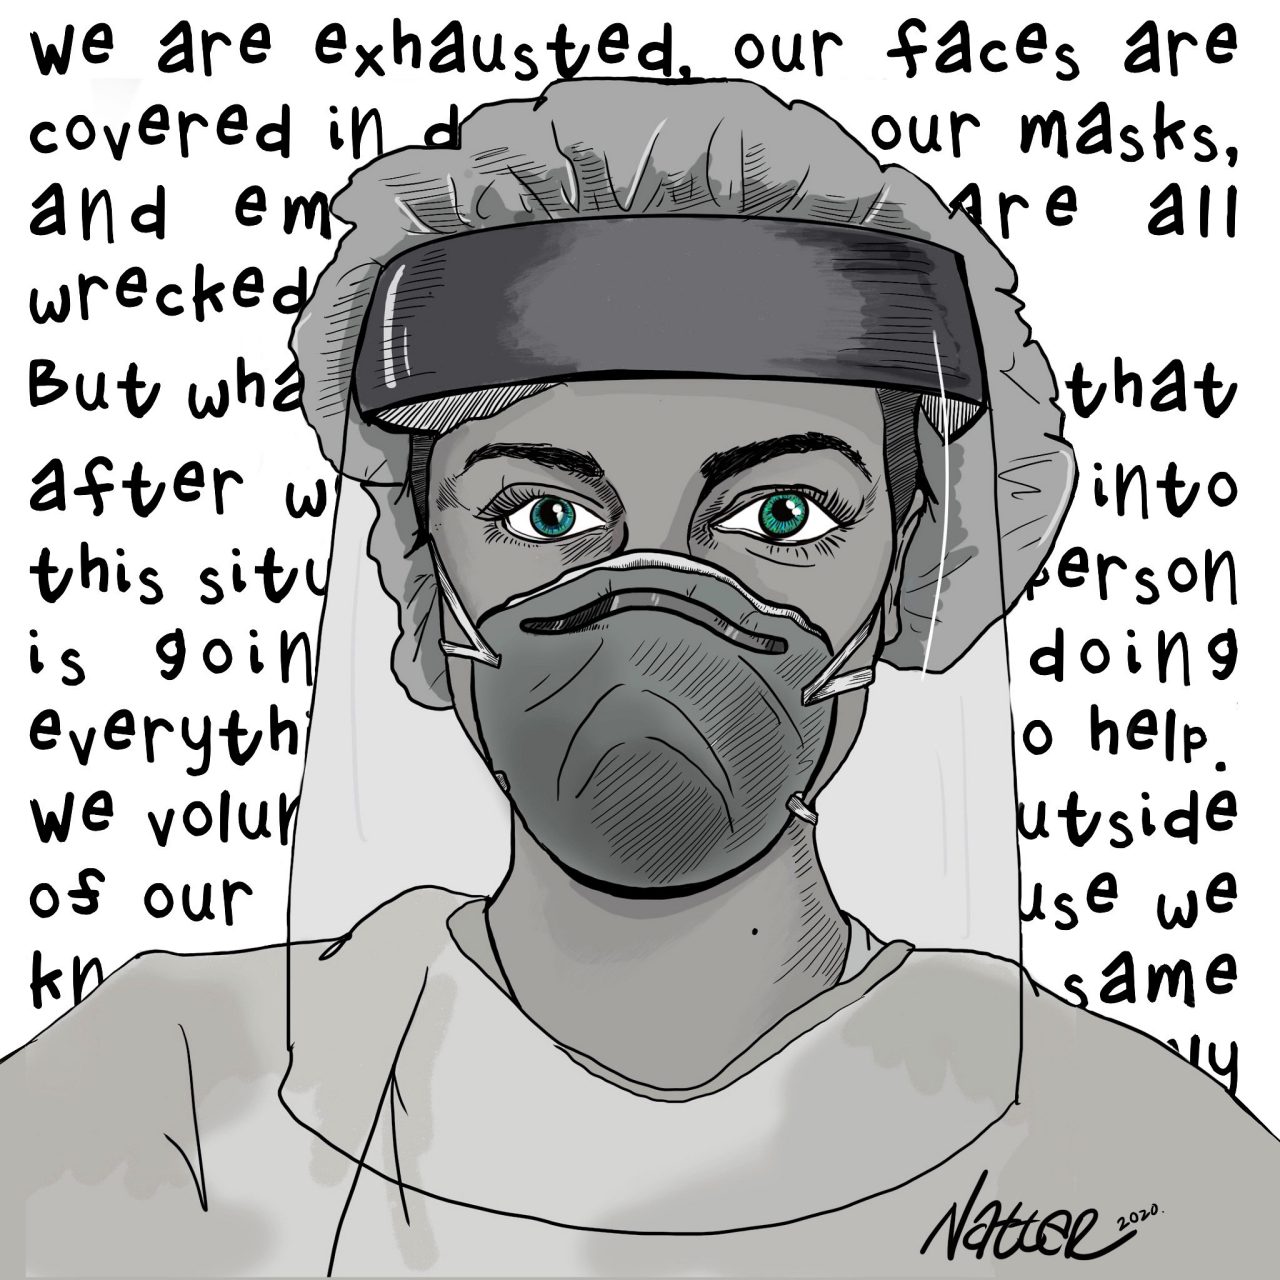 Cartoon drawn by Dr. Natter of a healthcare worker dressed in an N-95 mask and face shield